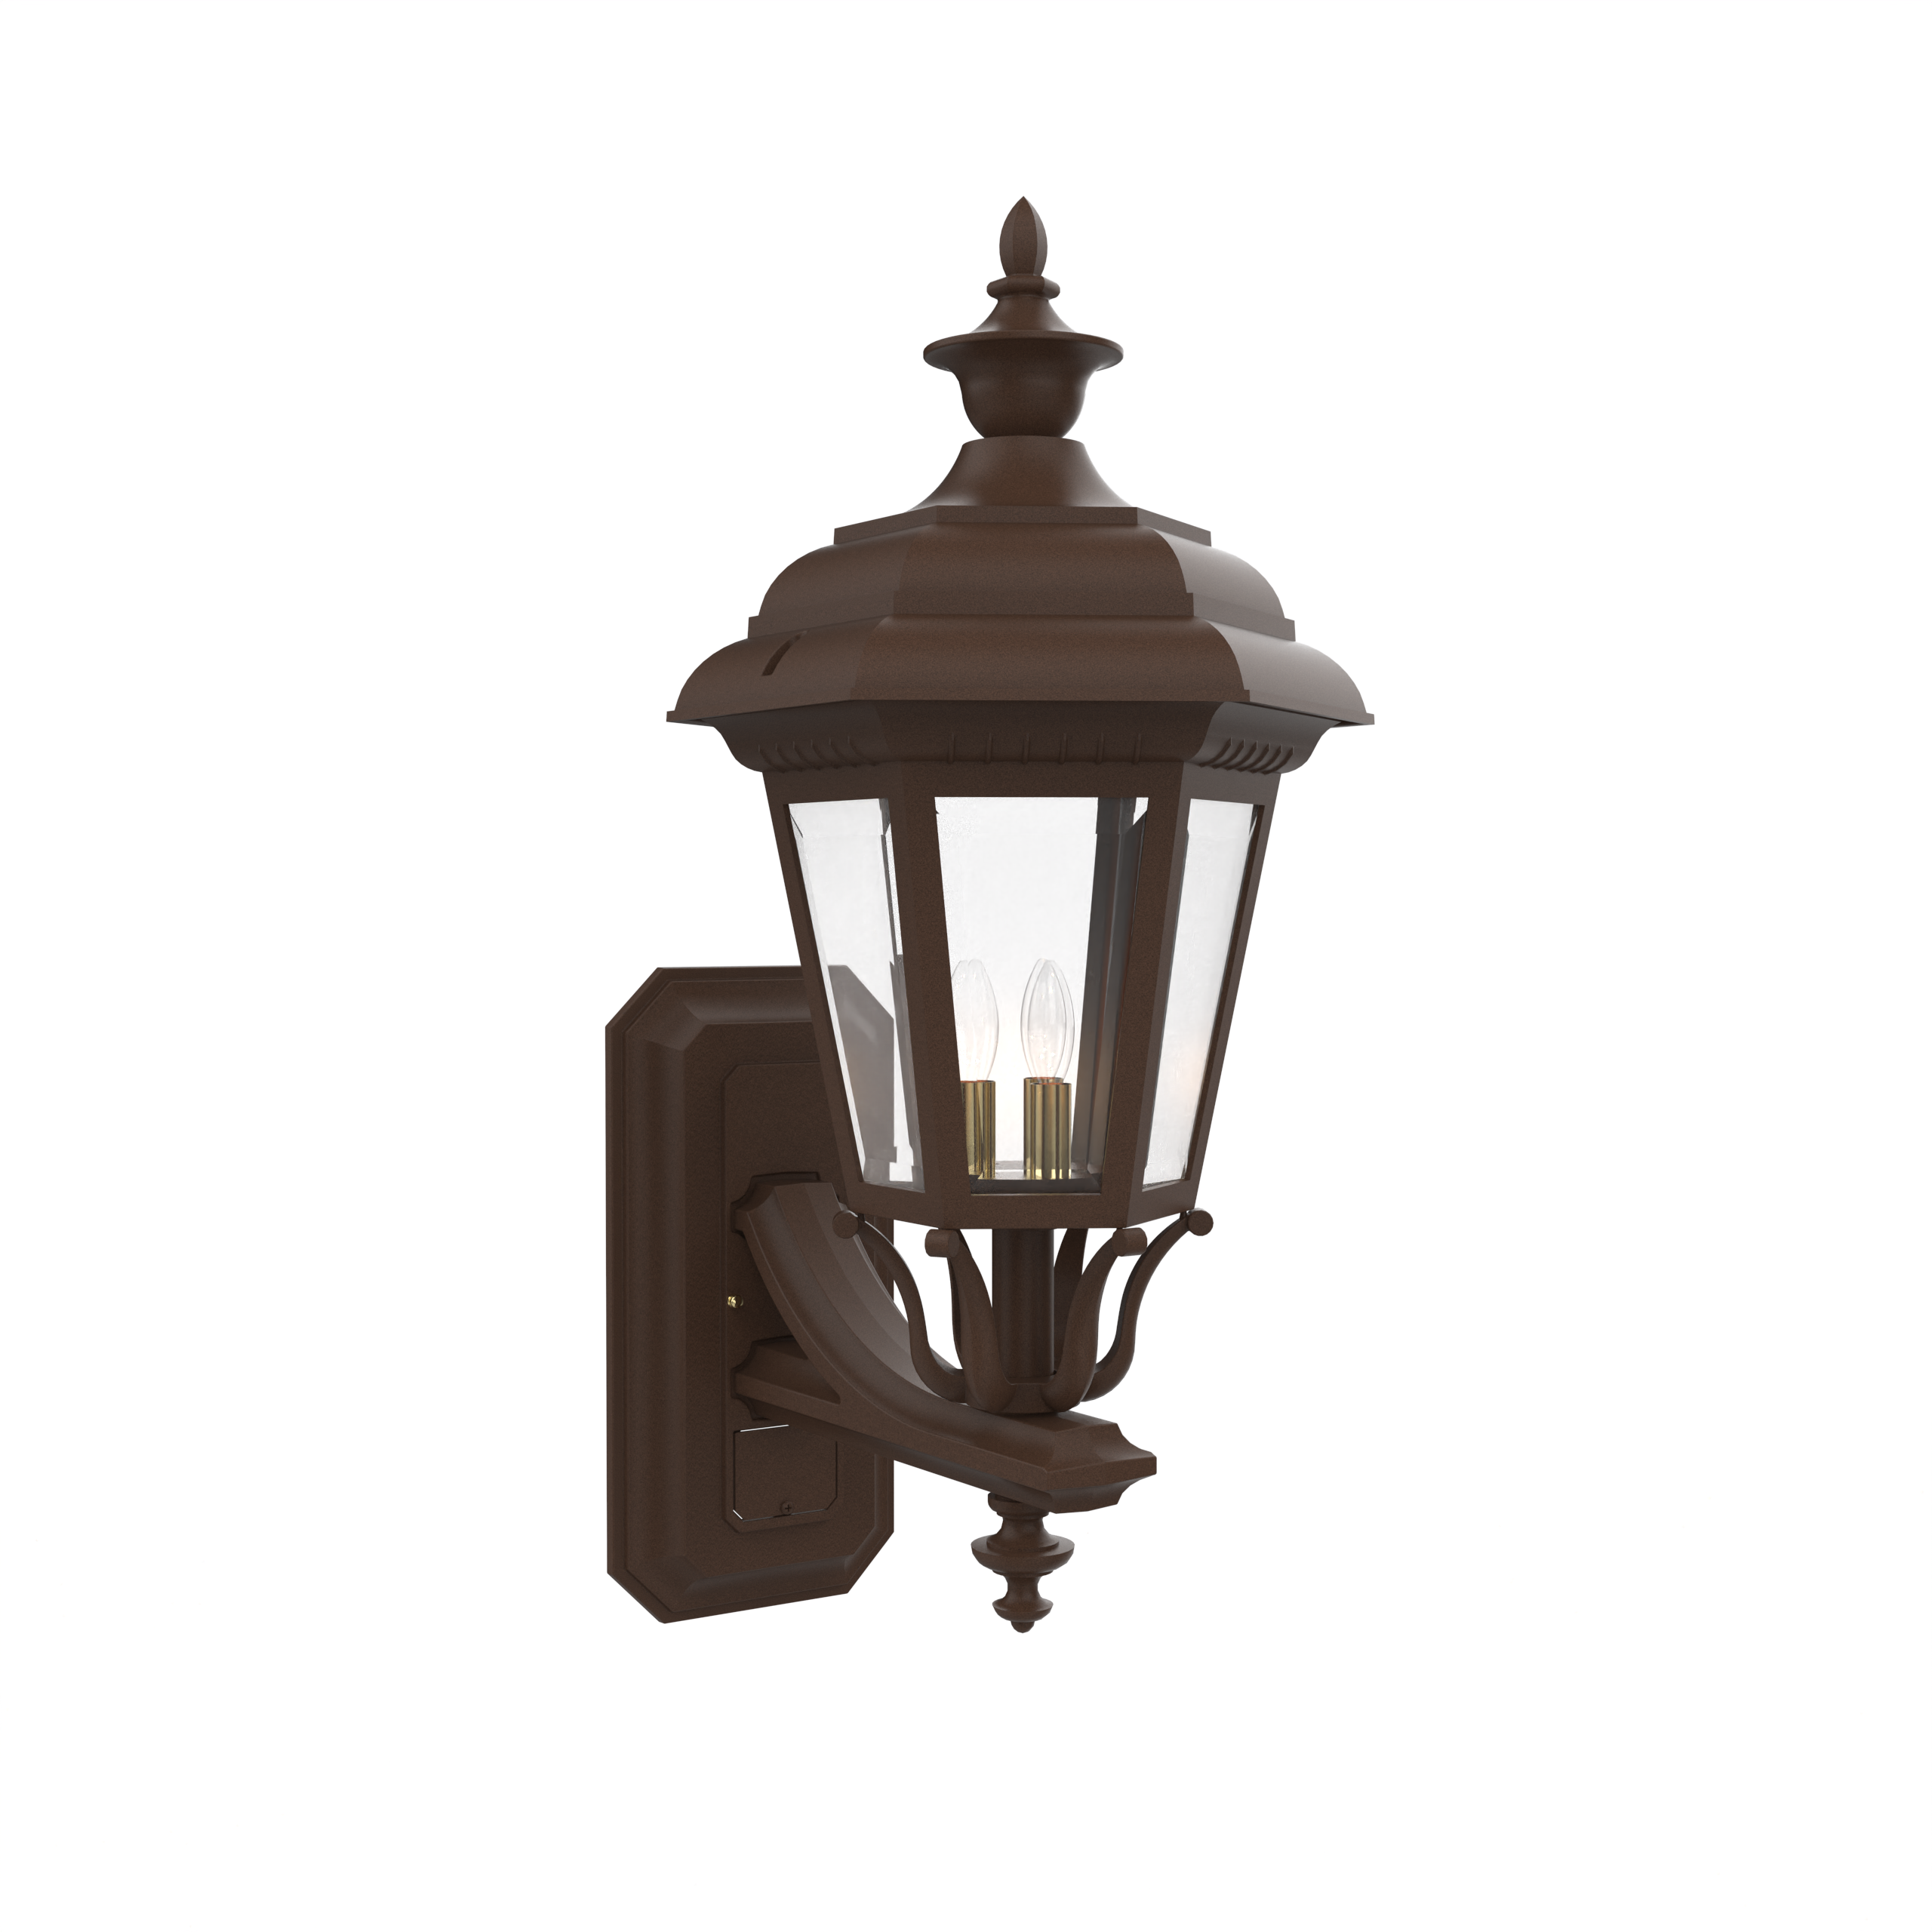 Jamestown - Up-Mount Wall Mount with Full Size Finial - 31412